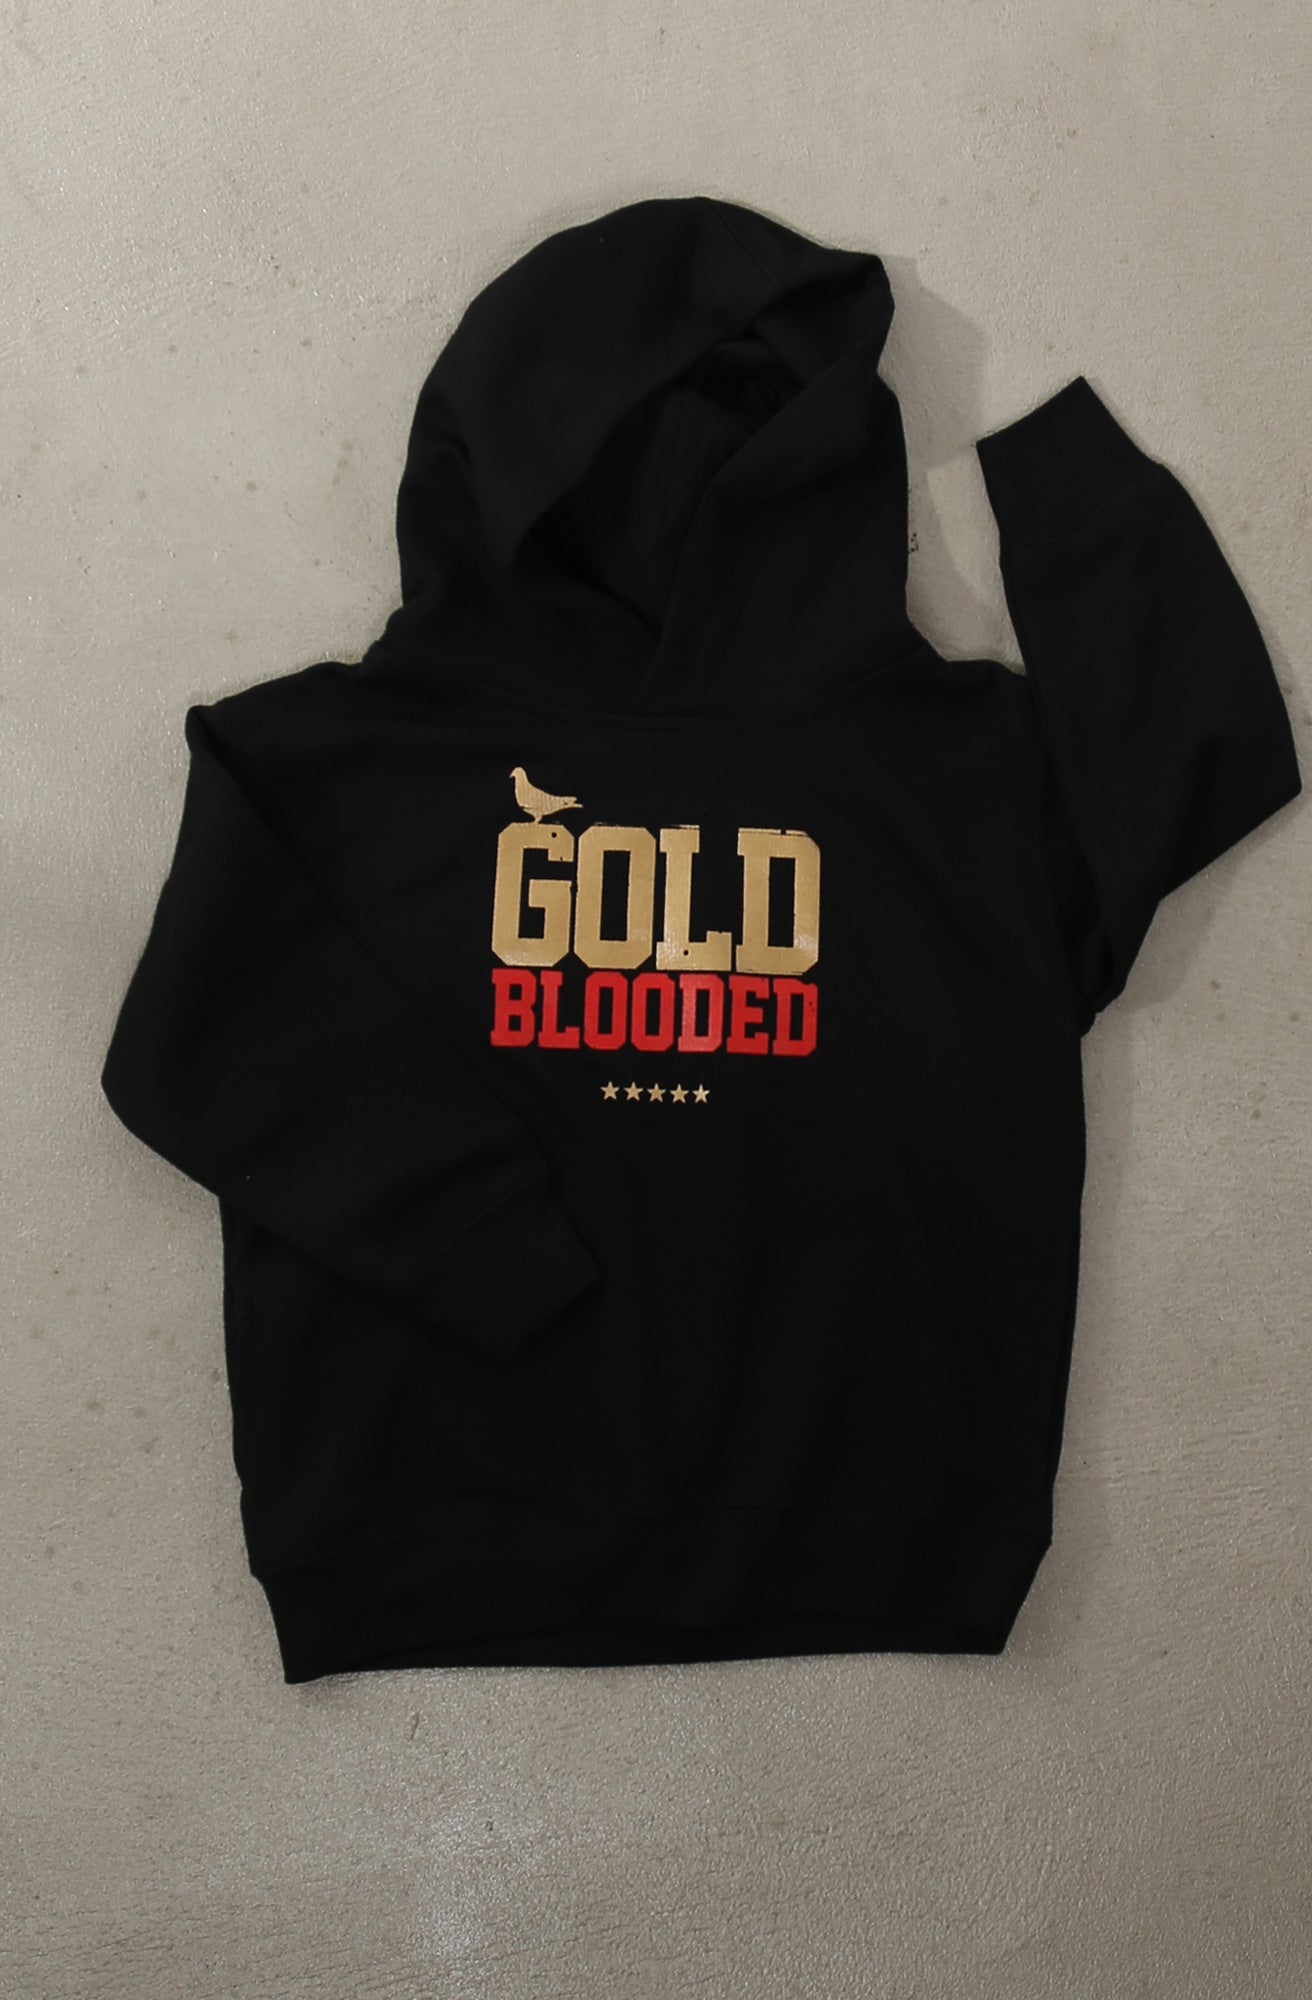 Gold Blooded (Tykes Unisex Black Hoody)